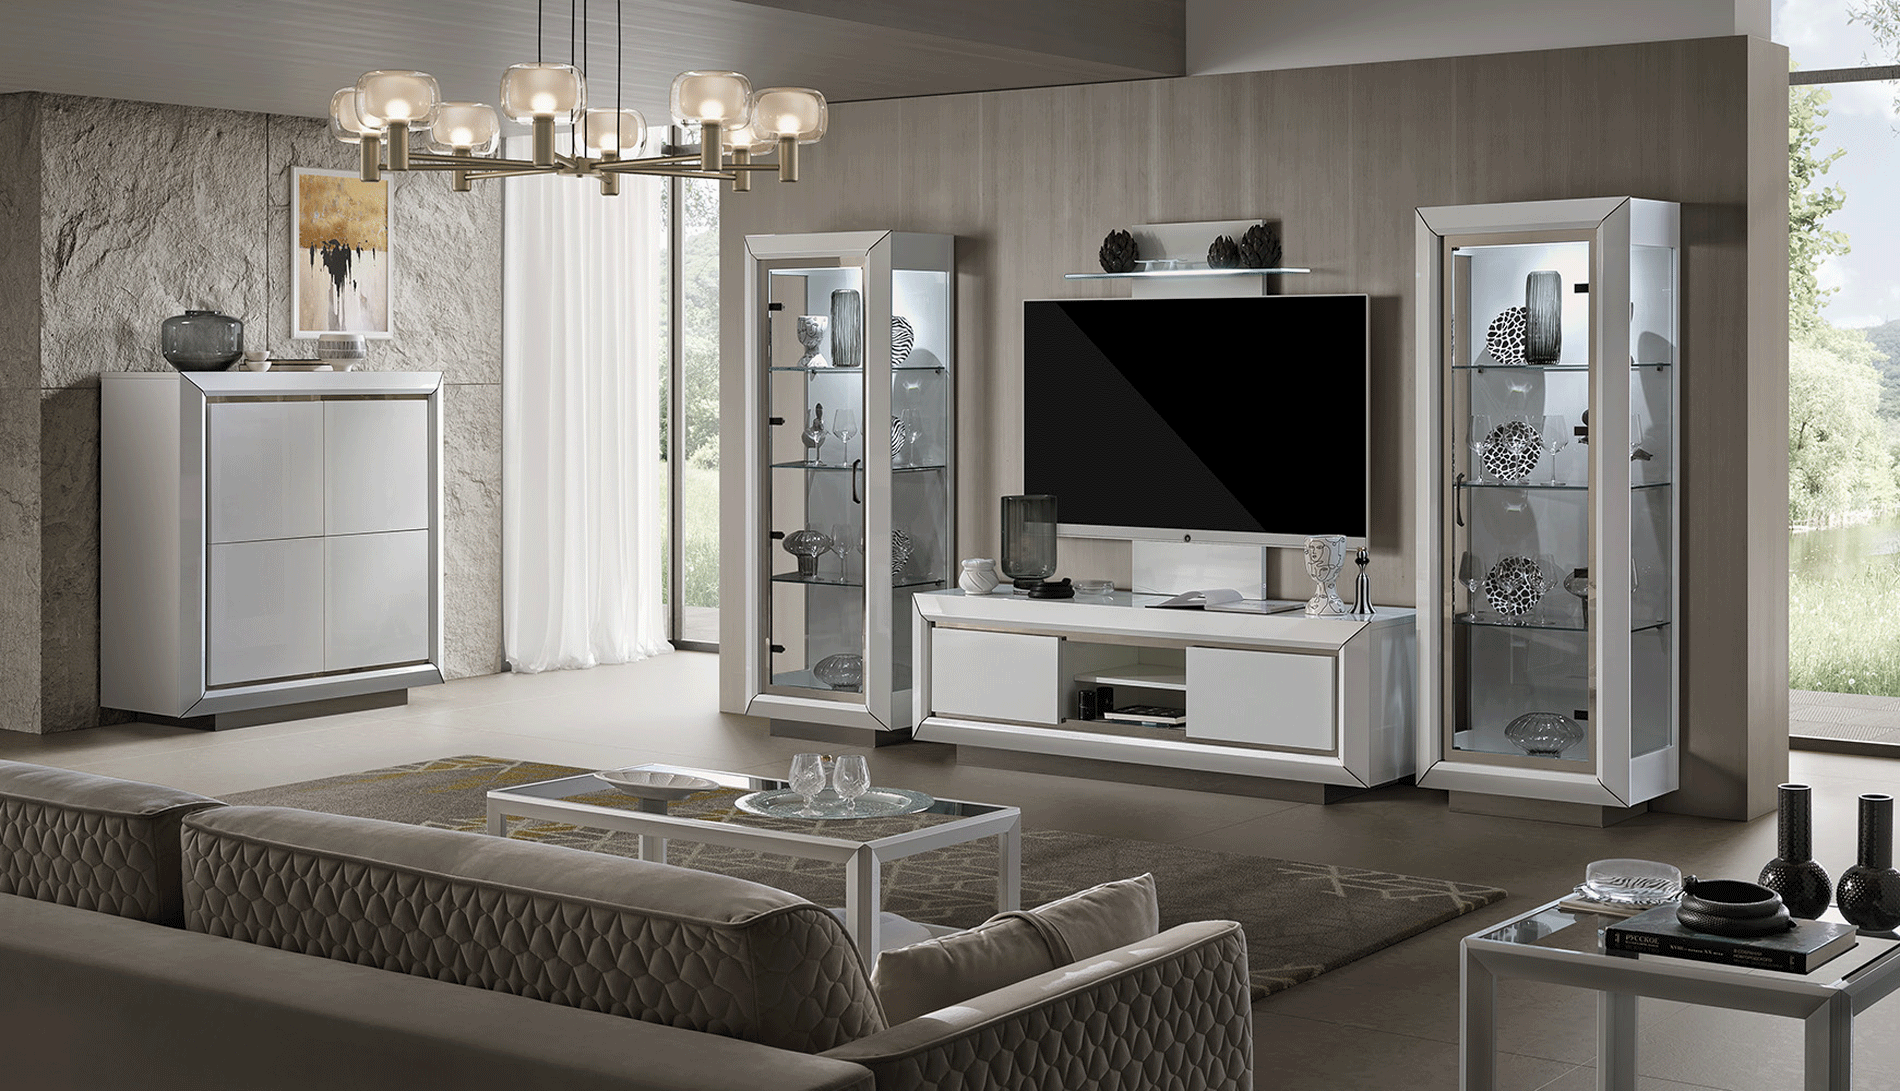 Brands Camel Gold Collection, Italy Elite WHITE Entertainment center Additional items